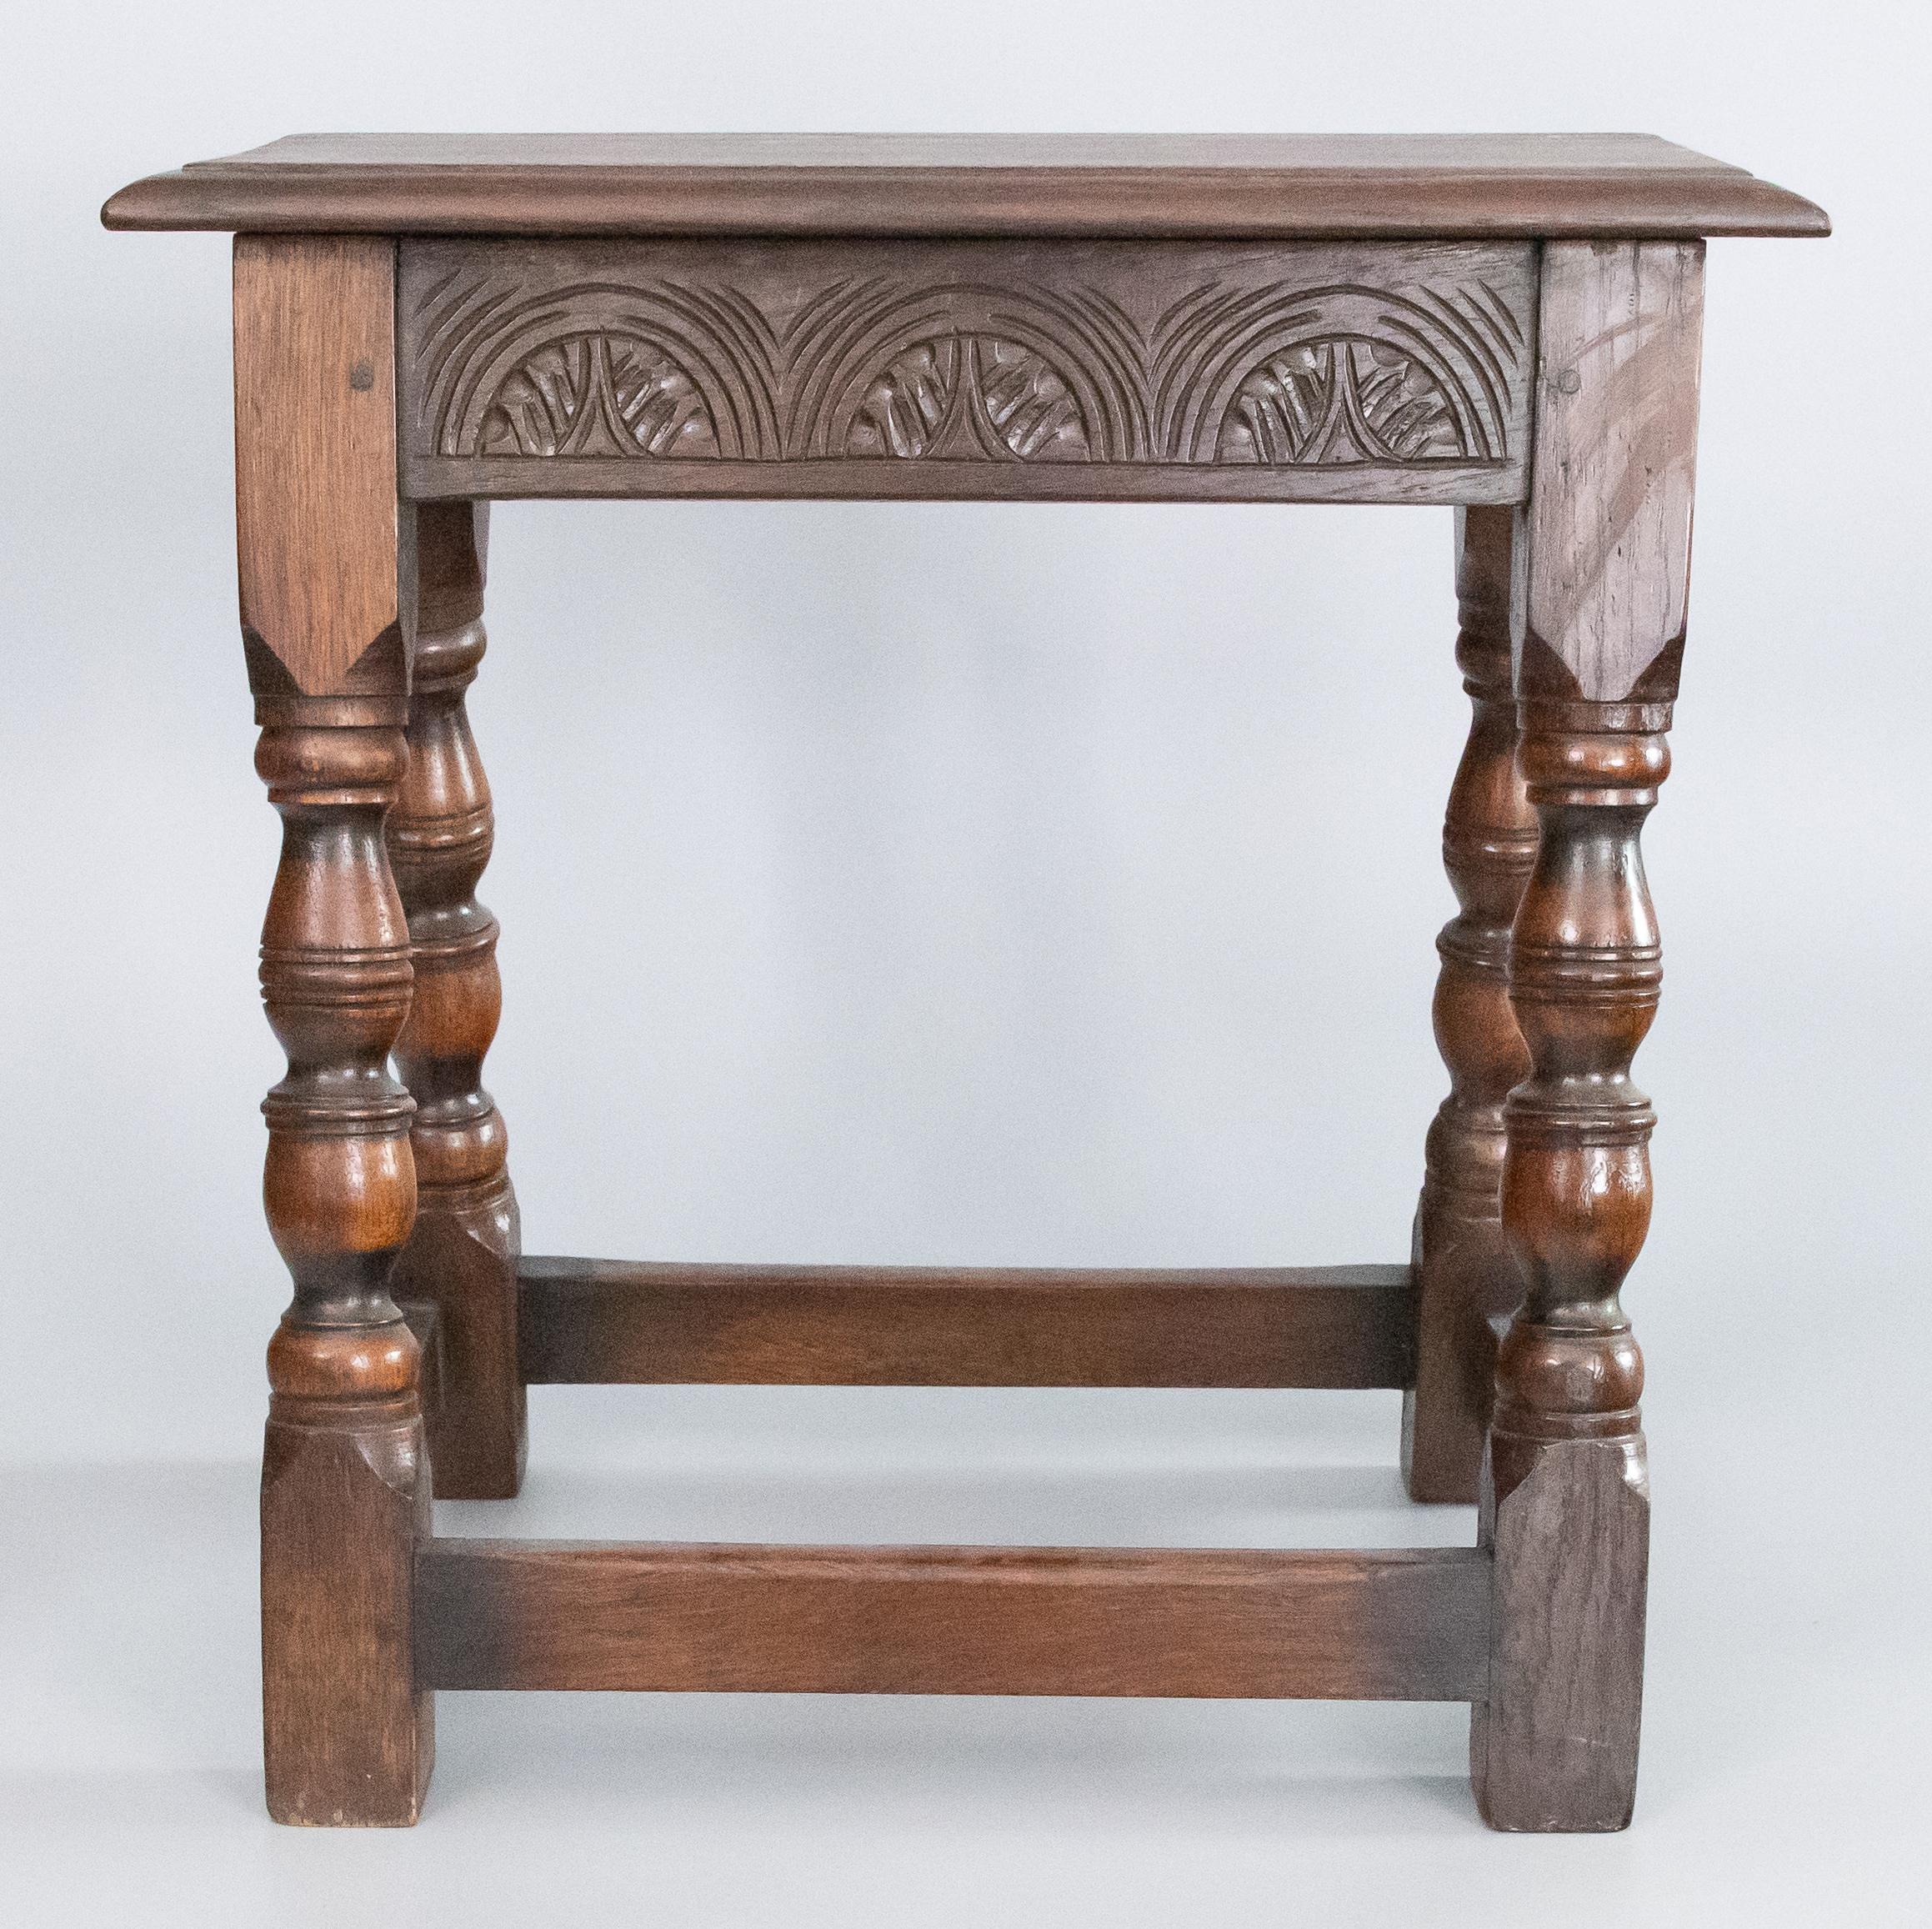 A superb antique 19th-century English oak joint stool with a beautifully carved apron, hand turned legs, and beveled seat. This fine stool would be great for extra seating and also perfect as a side table for beverages or your favorite